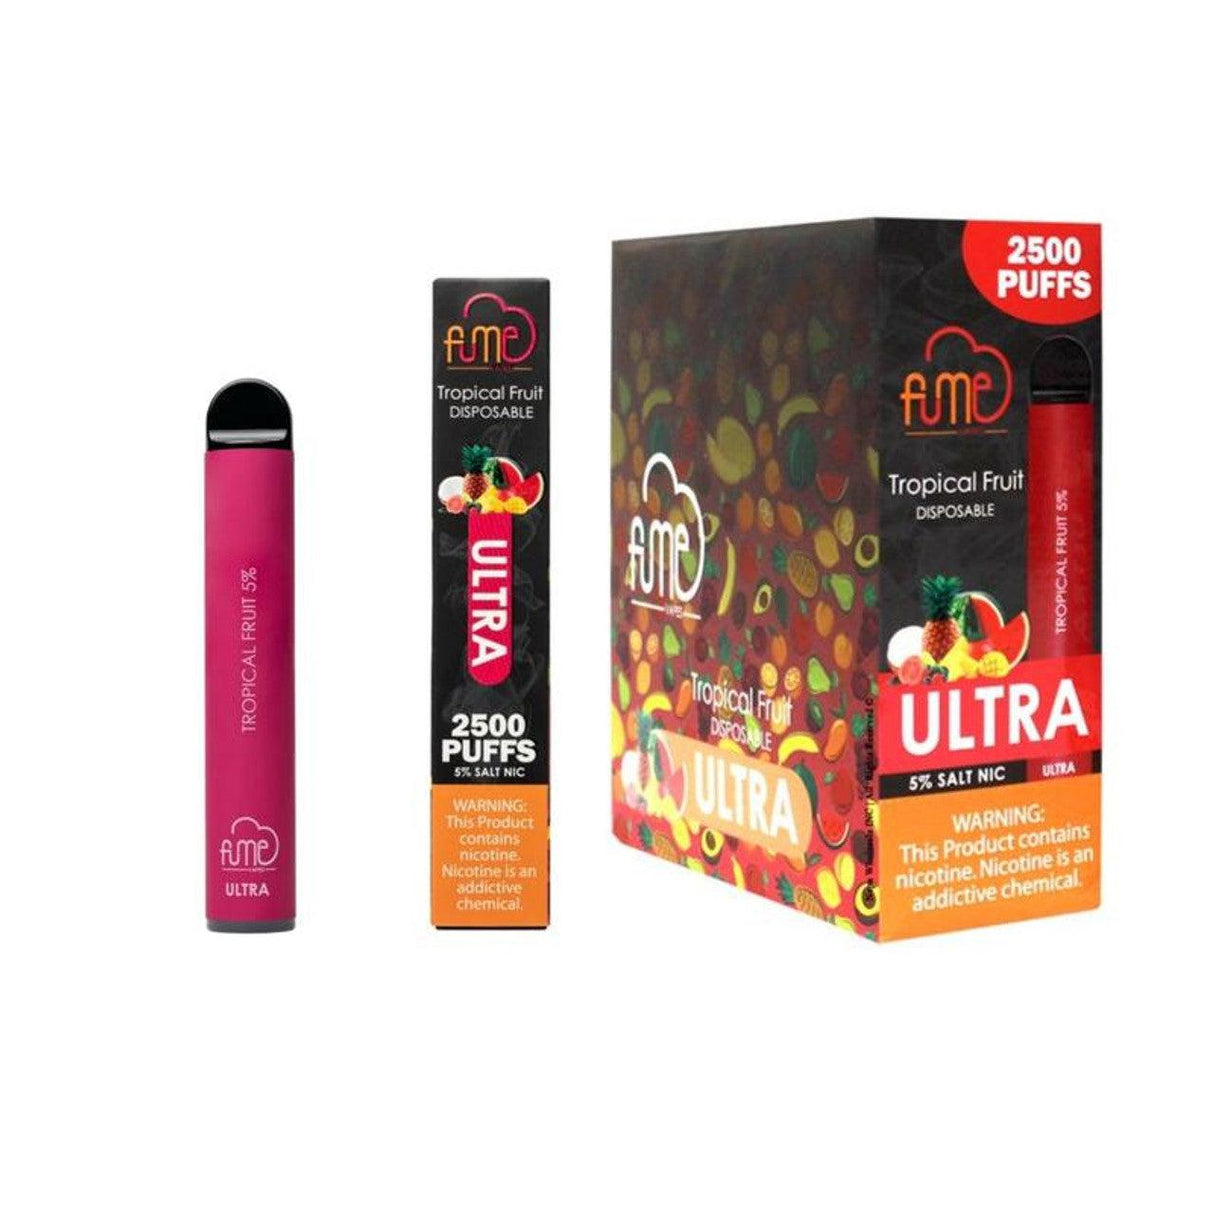 3 Pack Fume Extra 1500 Puffs Disposable Vape - Tropical Fruit